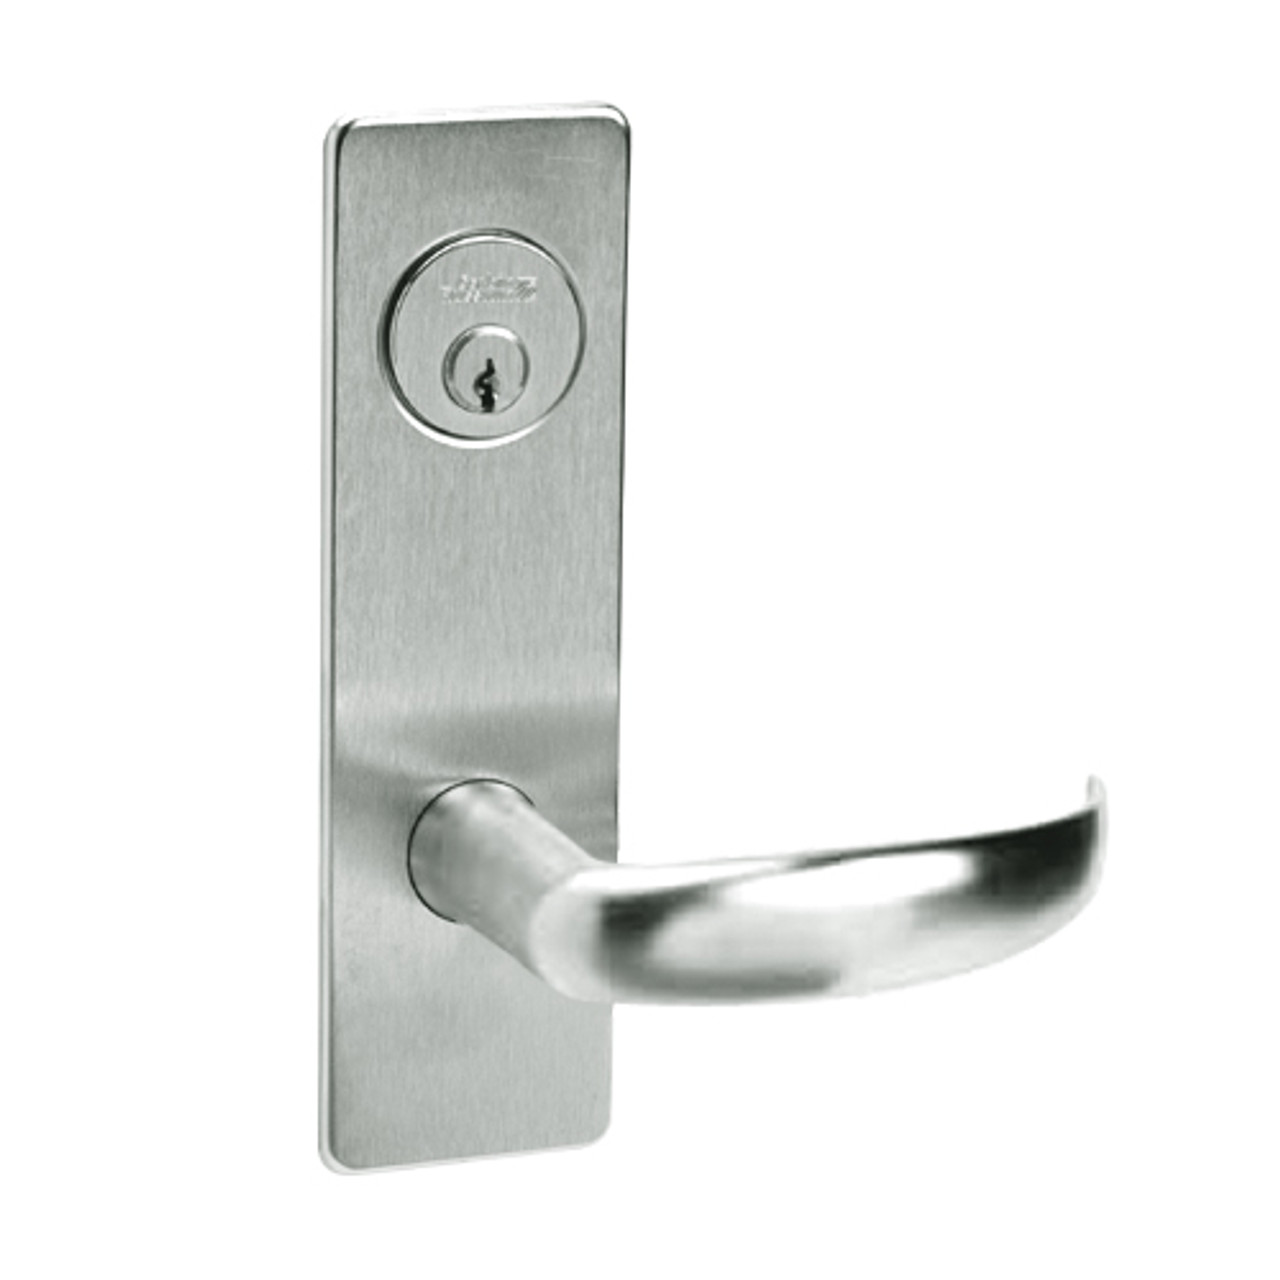 ML2058-PSM-618 Corbin Russwin ML2000 Series Mortise Entrance Holdback Locksets with Princeton Lever in Bright Nickel